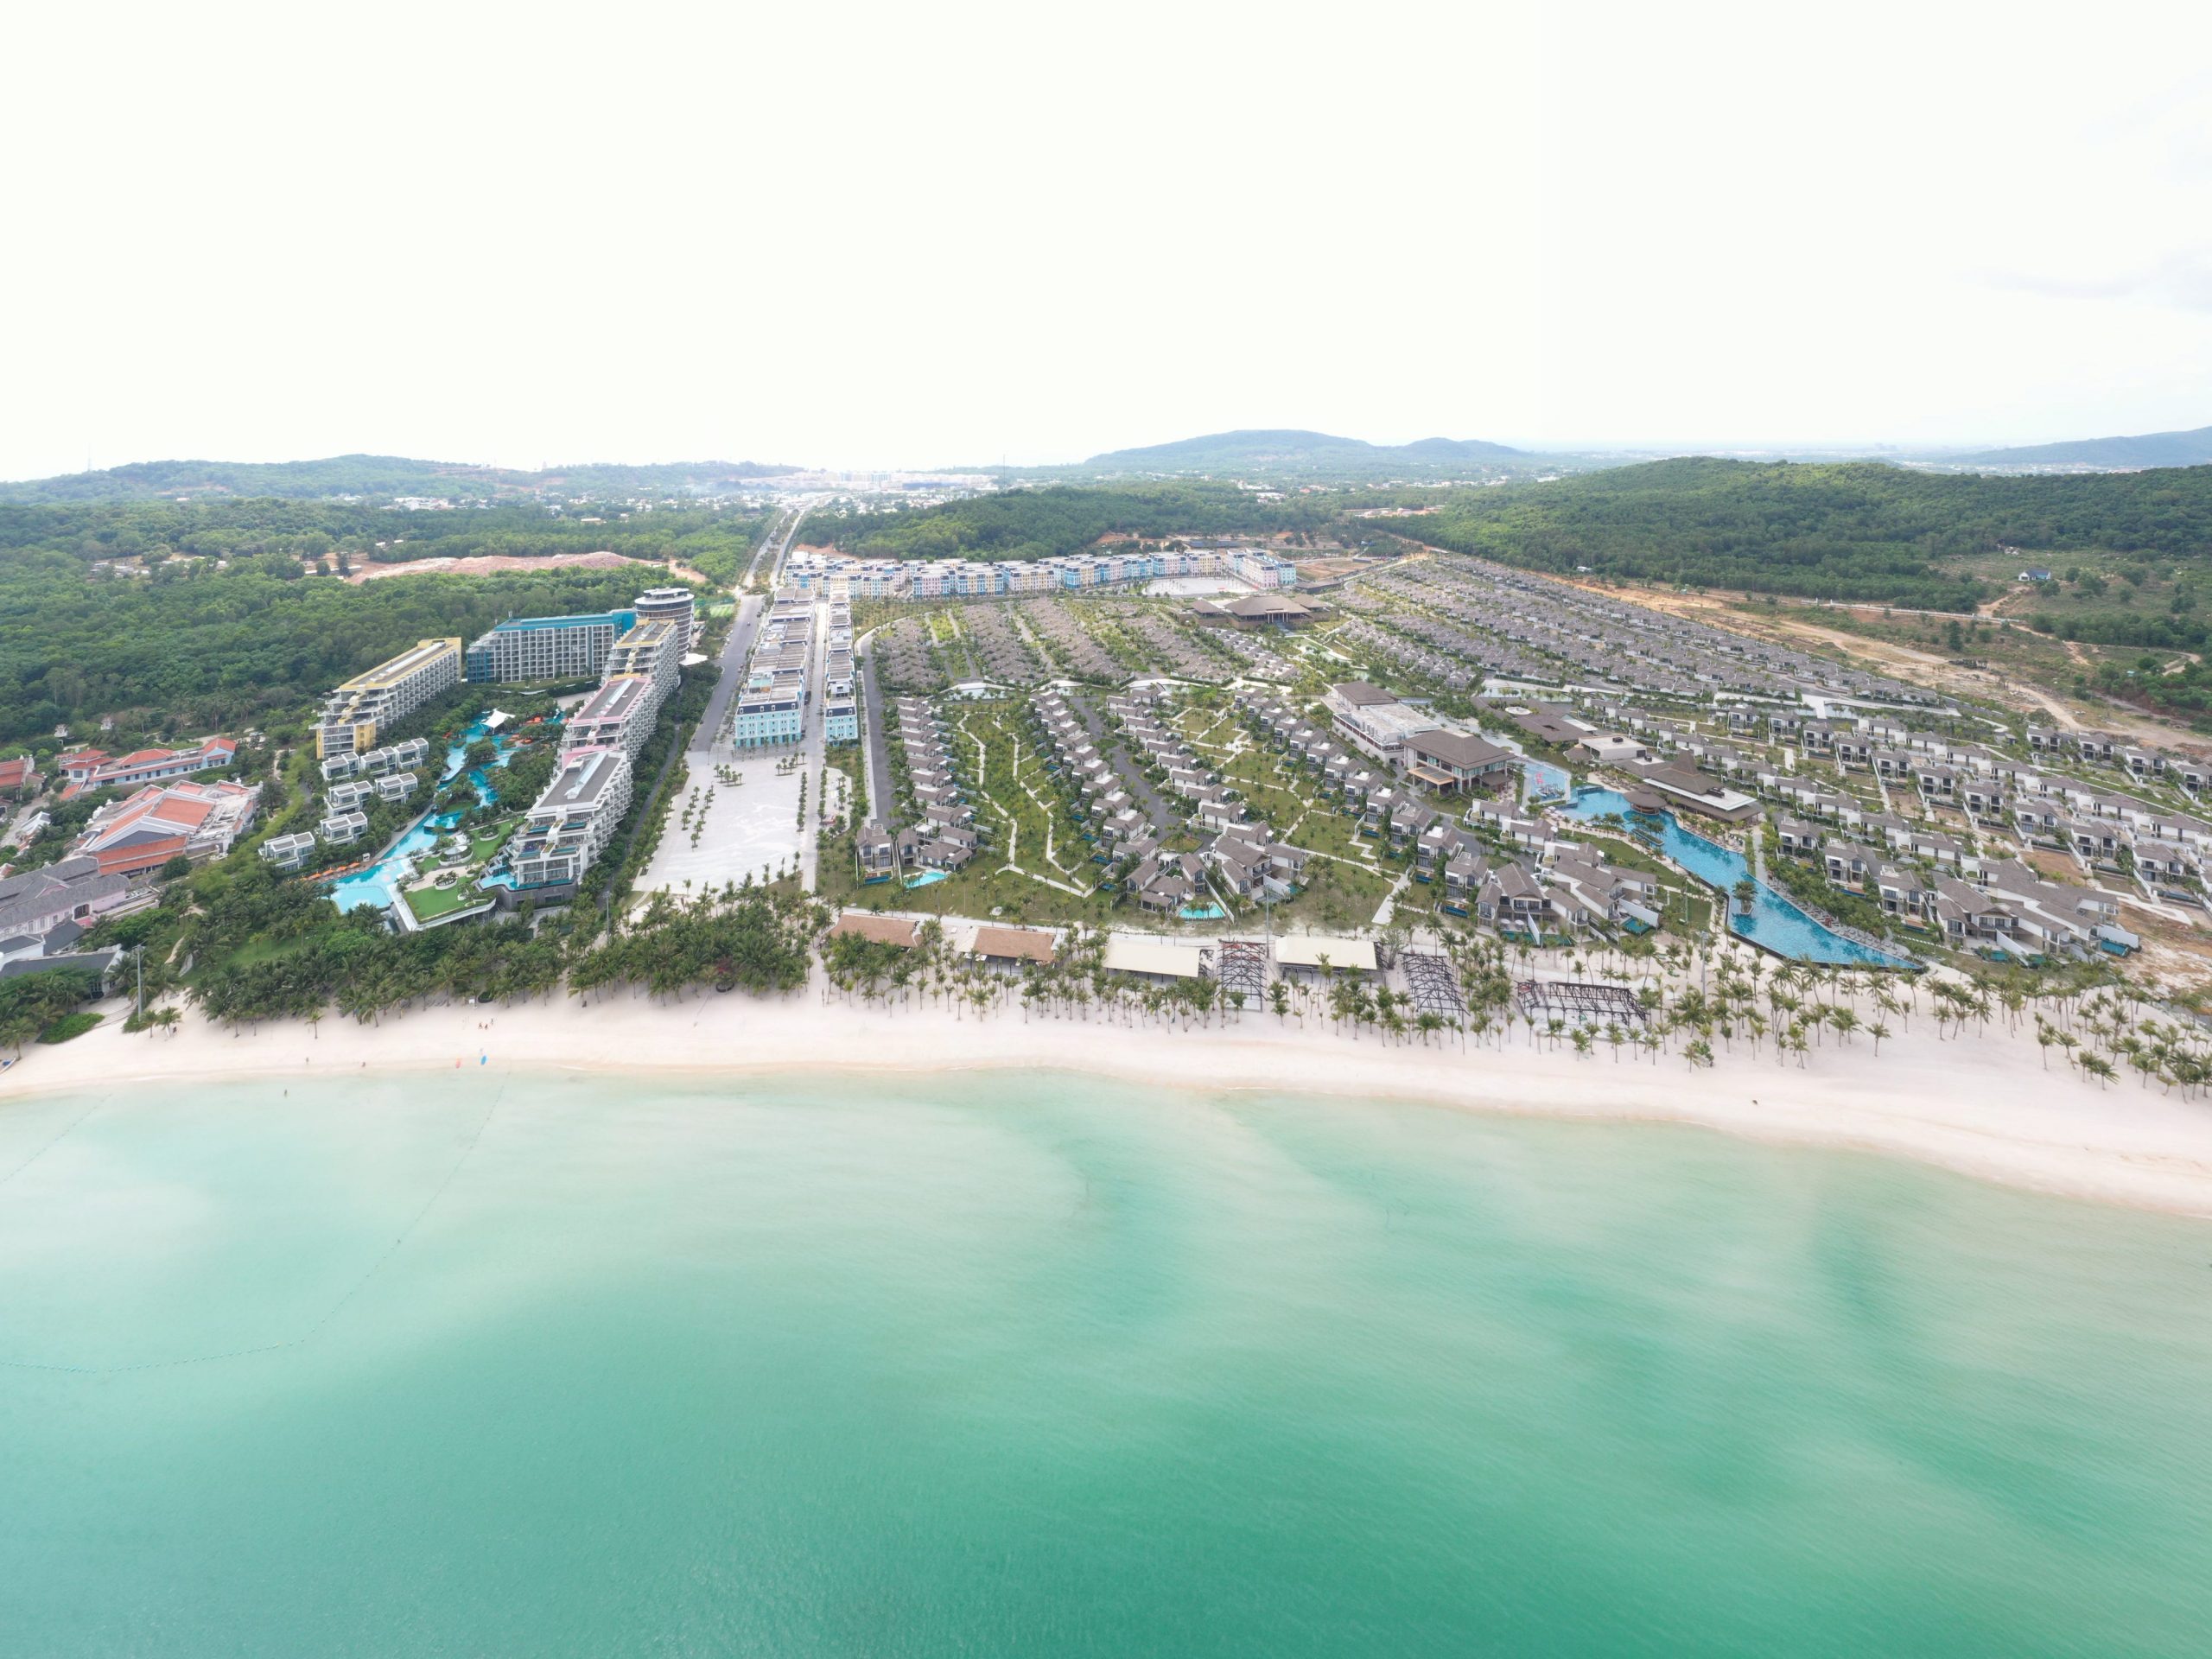 Rows of resorts and hotels built up on the beach in Vietnam